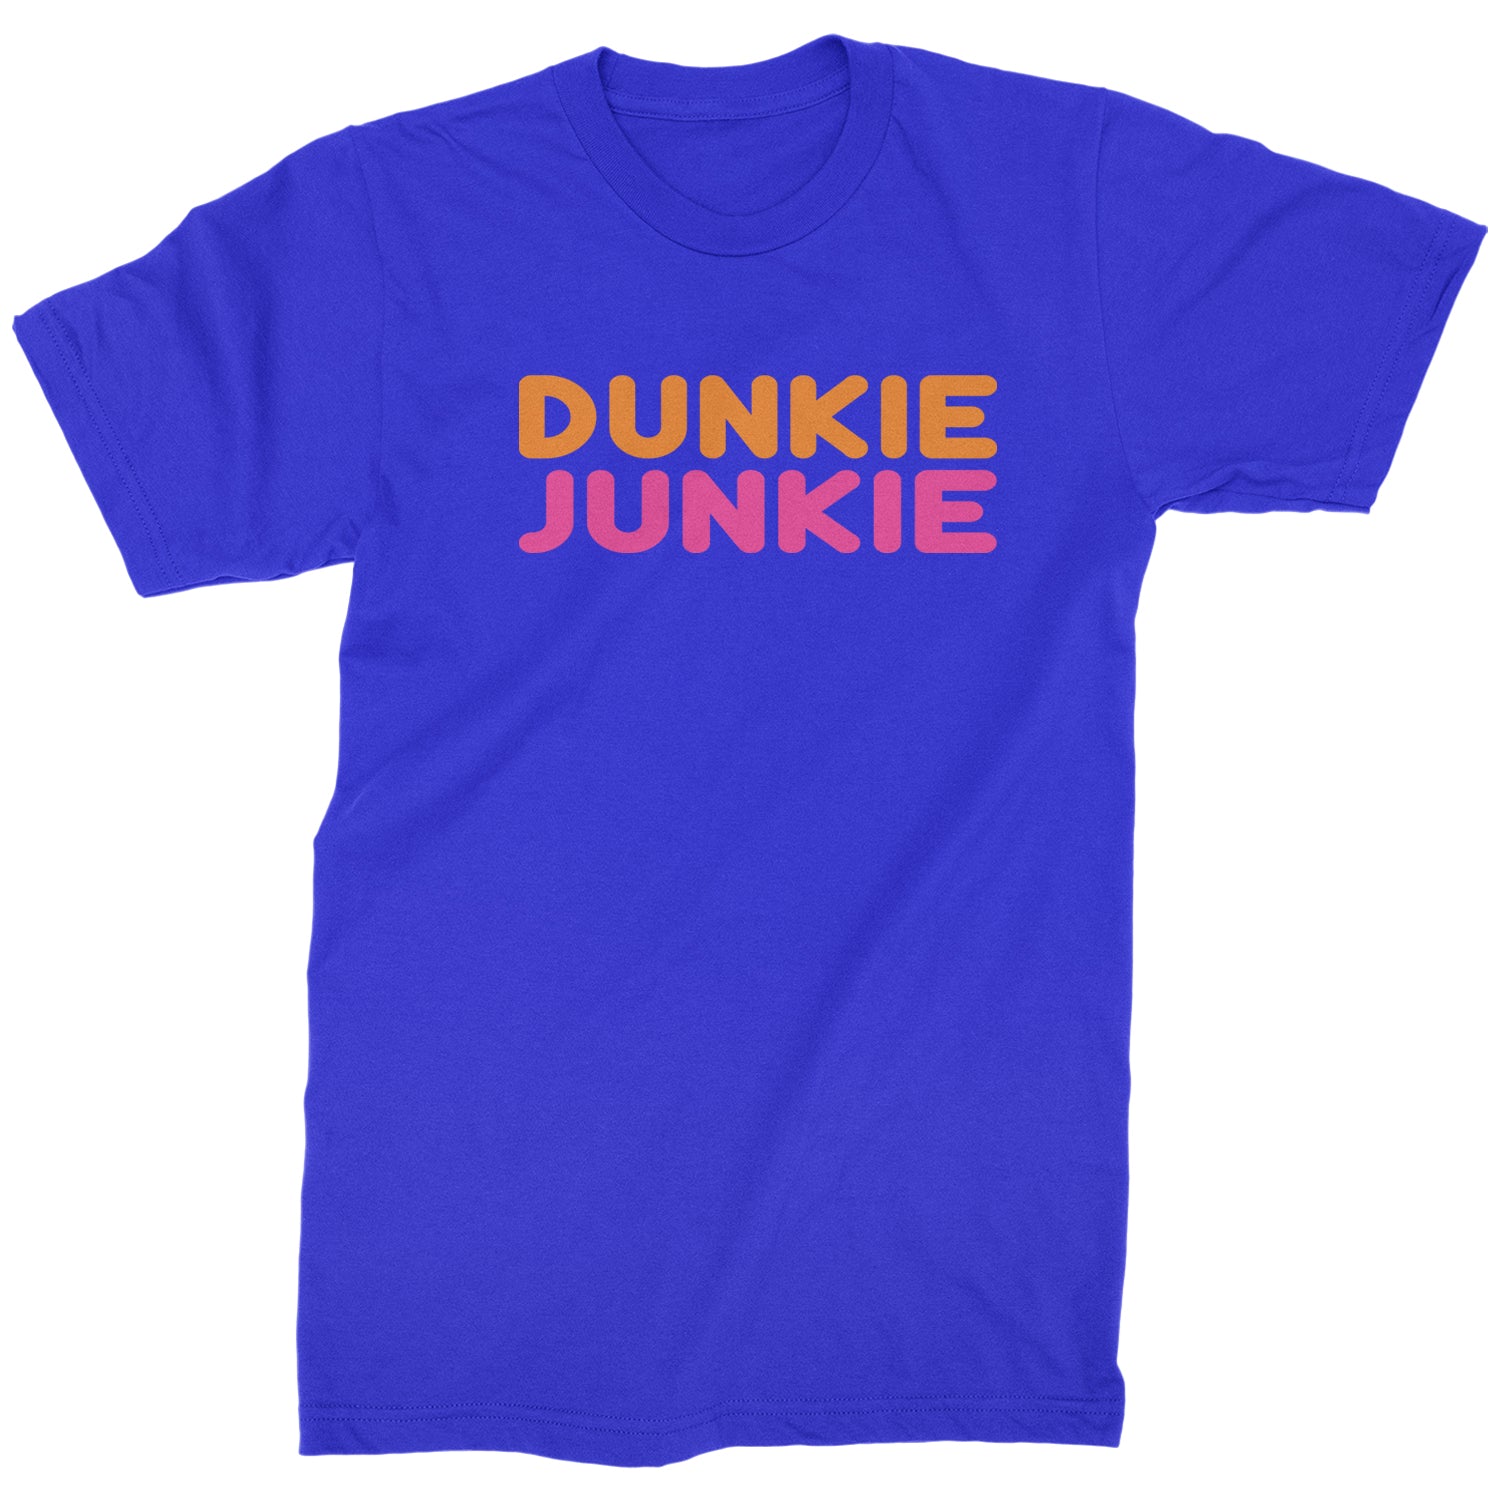 Dunkie Junkie Mens T-shirt addict, capuccino, coffee, dd, dnkn, dunkin, dunking, latte by Expression Tees